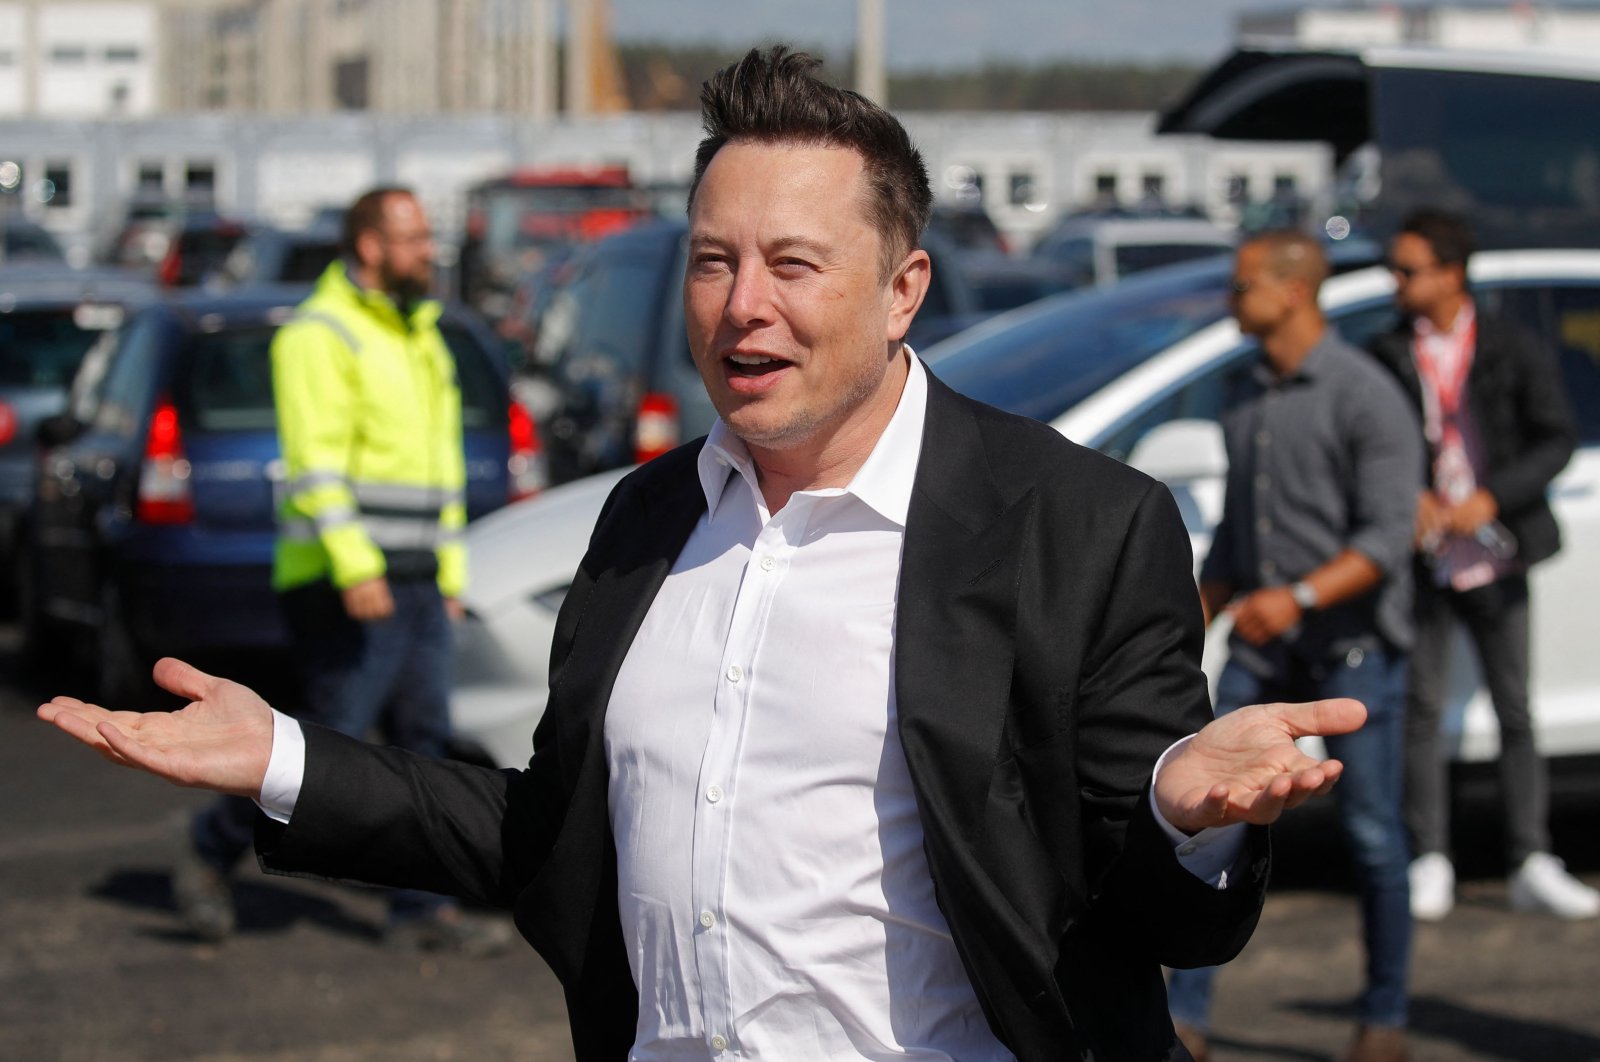 Tesla CEO Elon Musk gestures as he arrives at the construction site of the future factory of U.S. electric car giant Tesla, in Gruenheide near Berlin, Germany, Sept. 3, 2020.  (AFP Photo)